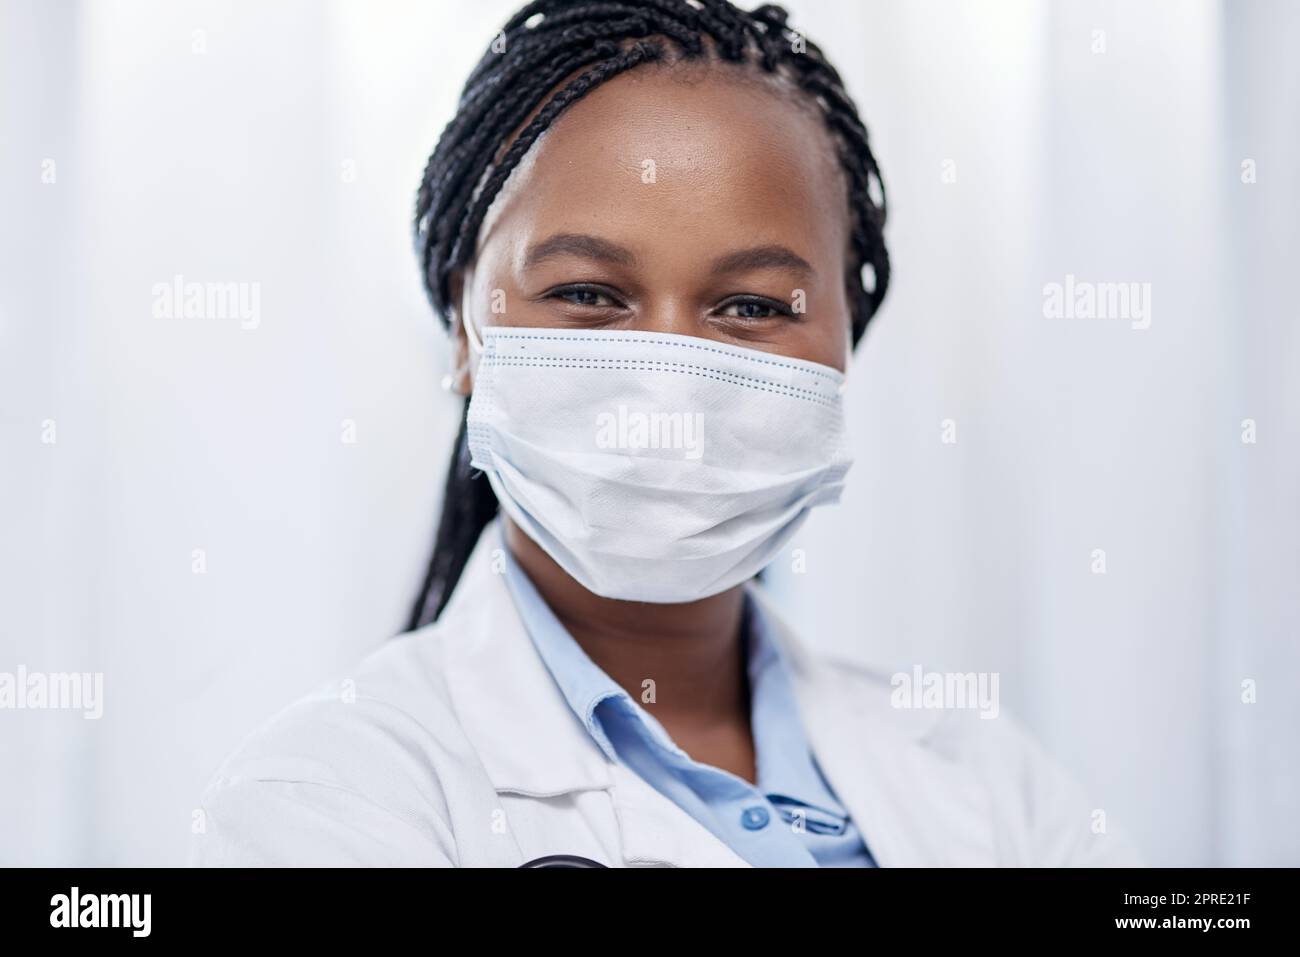 Doctor wearing hygiene face mask for covid, safety and precaution in the healthcare industry. Portrait and face of confident black medical practitioner and coronavirus frontline worker in a hospital Stock Photo